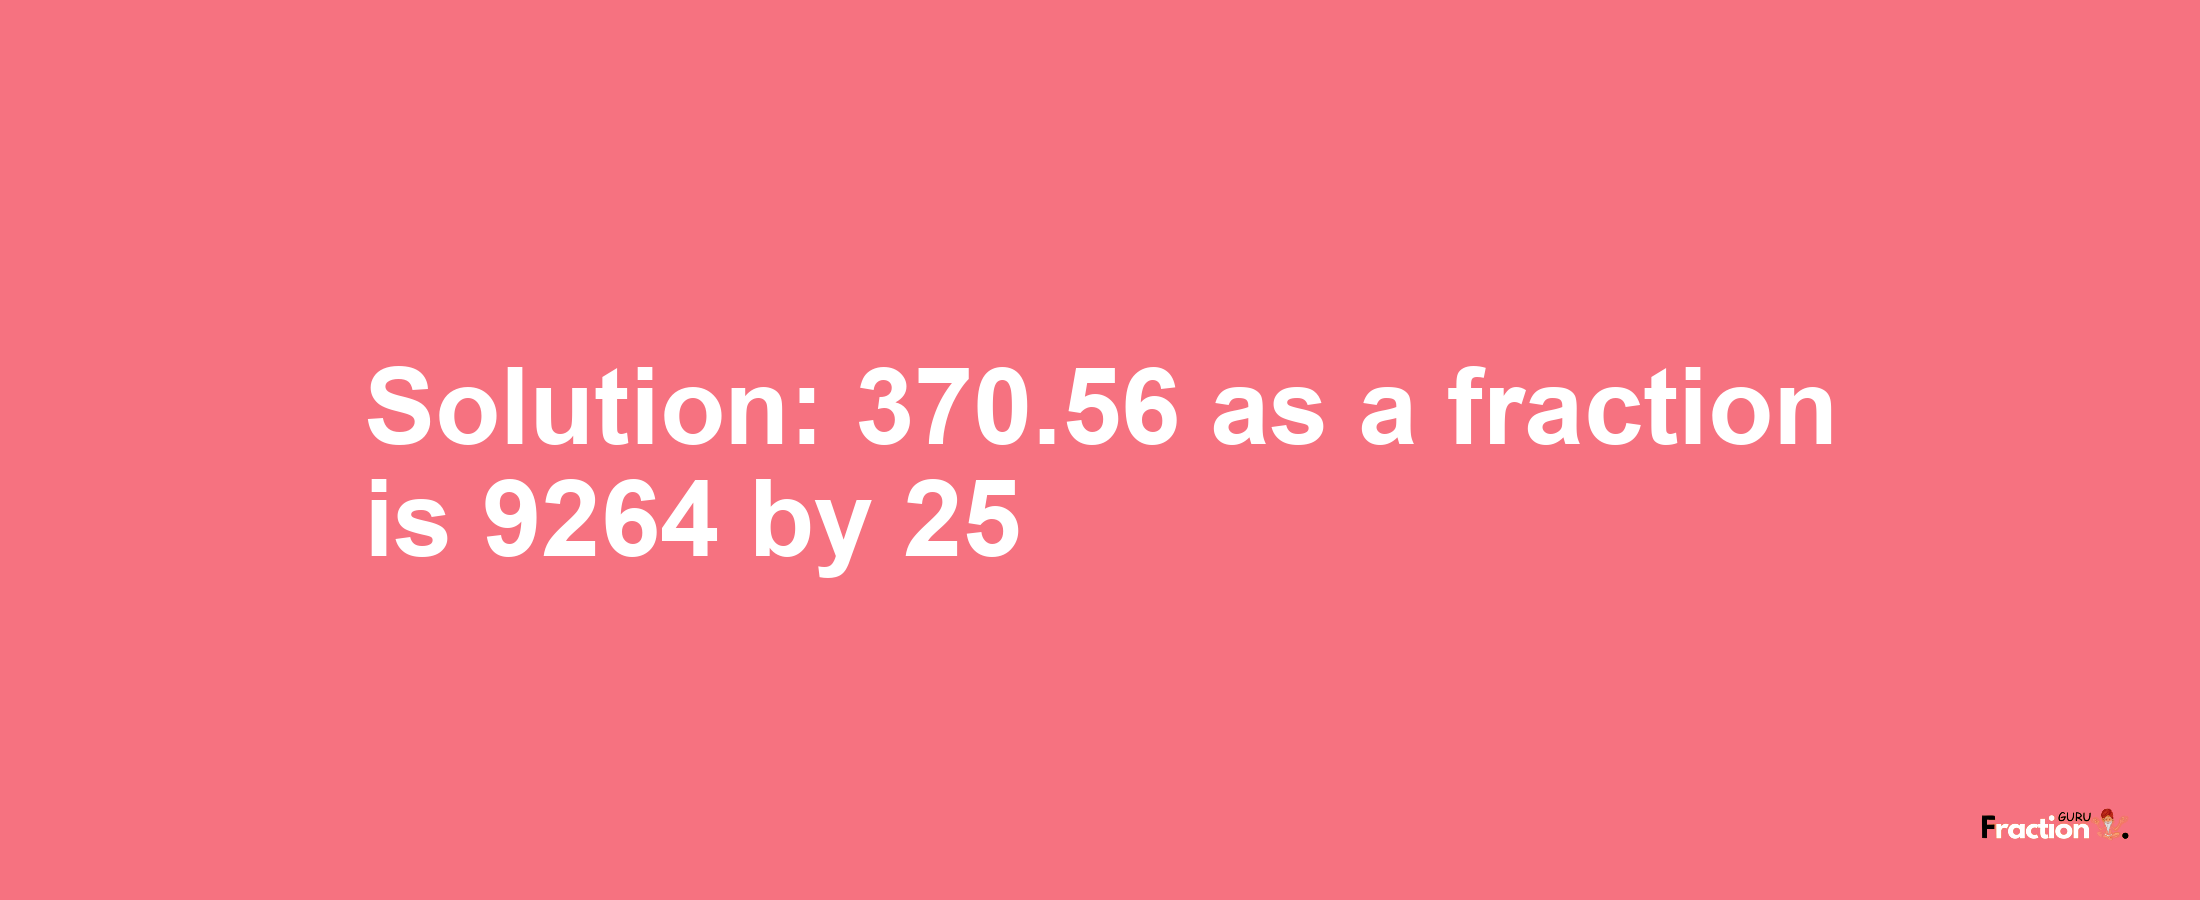 Solution:370.56 as a fraction is 9264/25